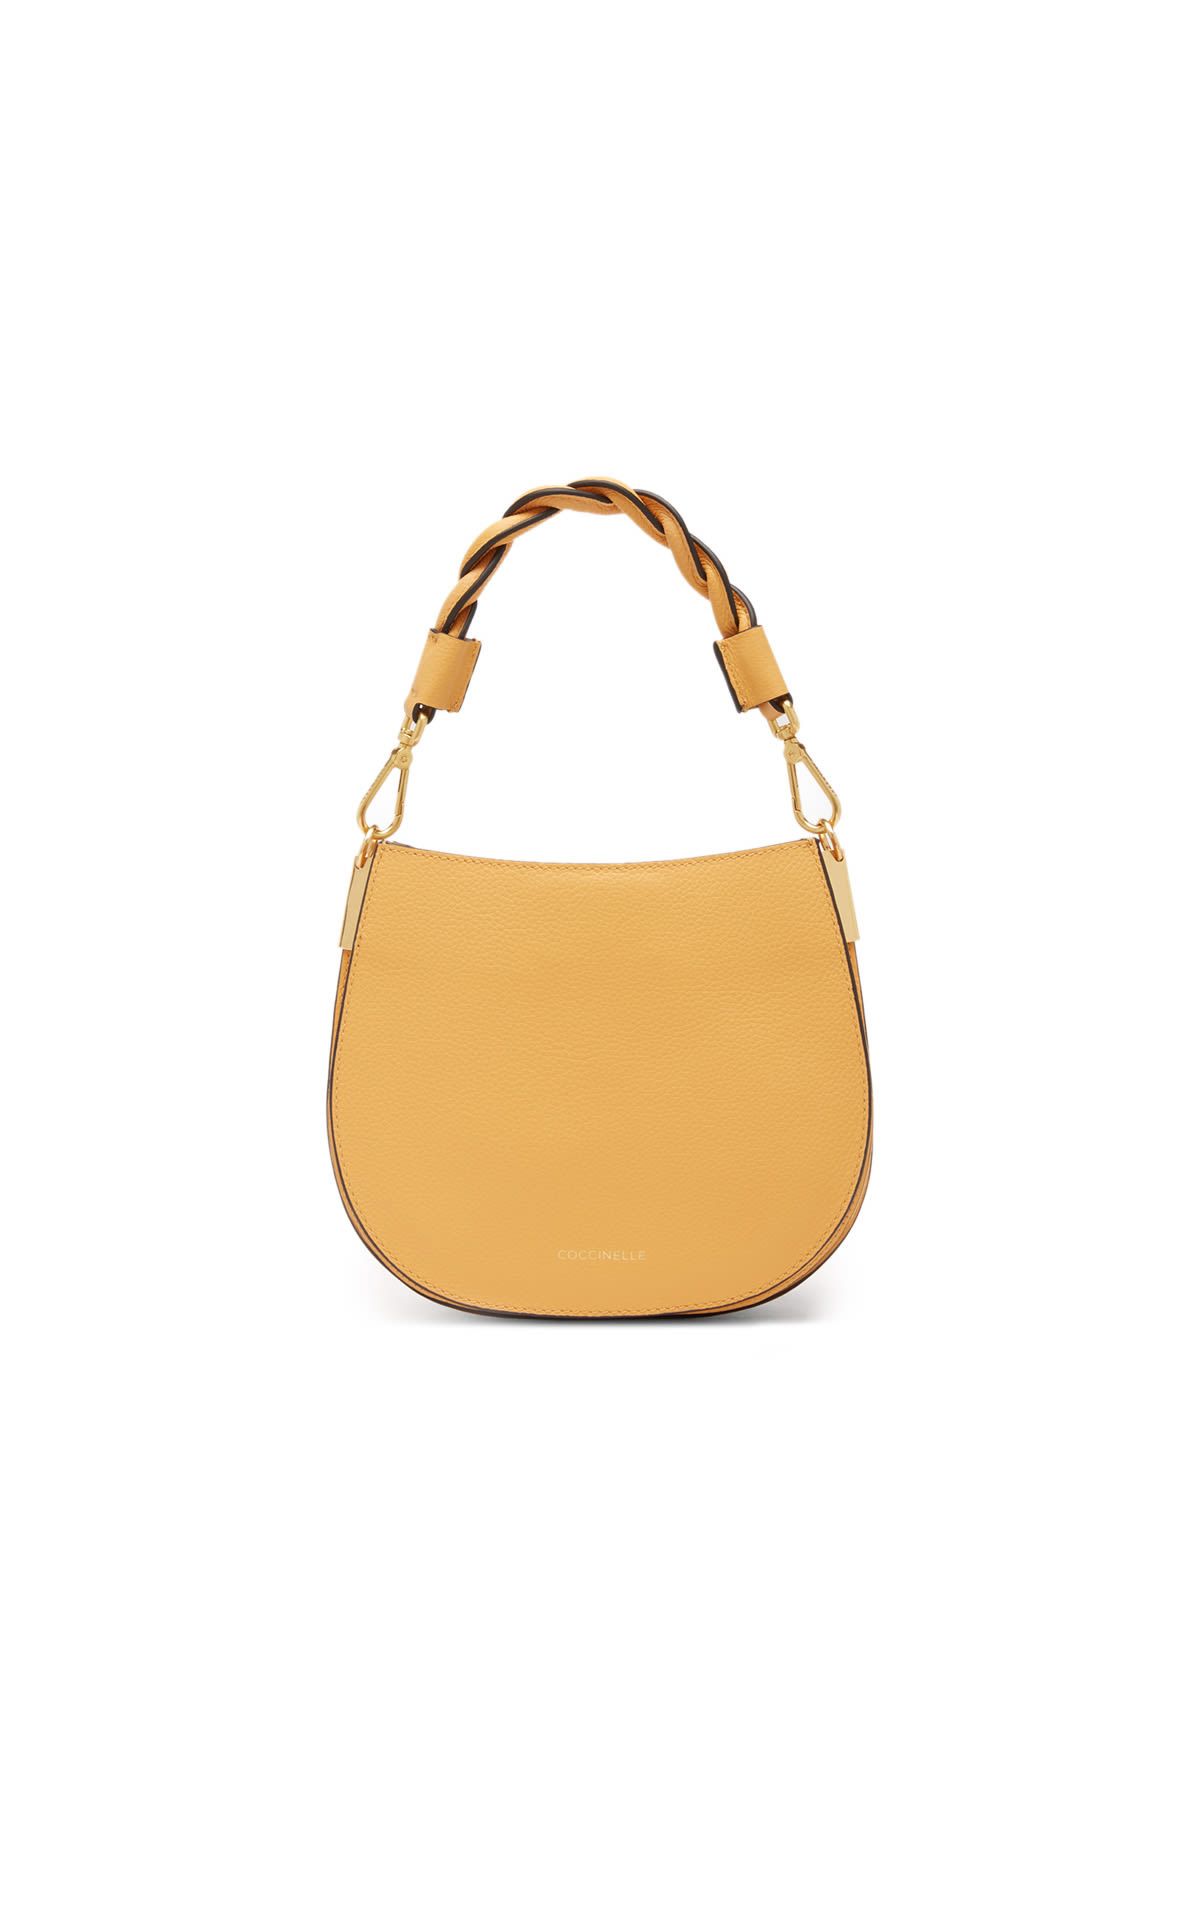 Coccinelle Arpege bag with interlaced handle